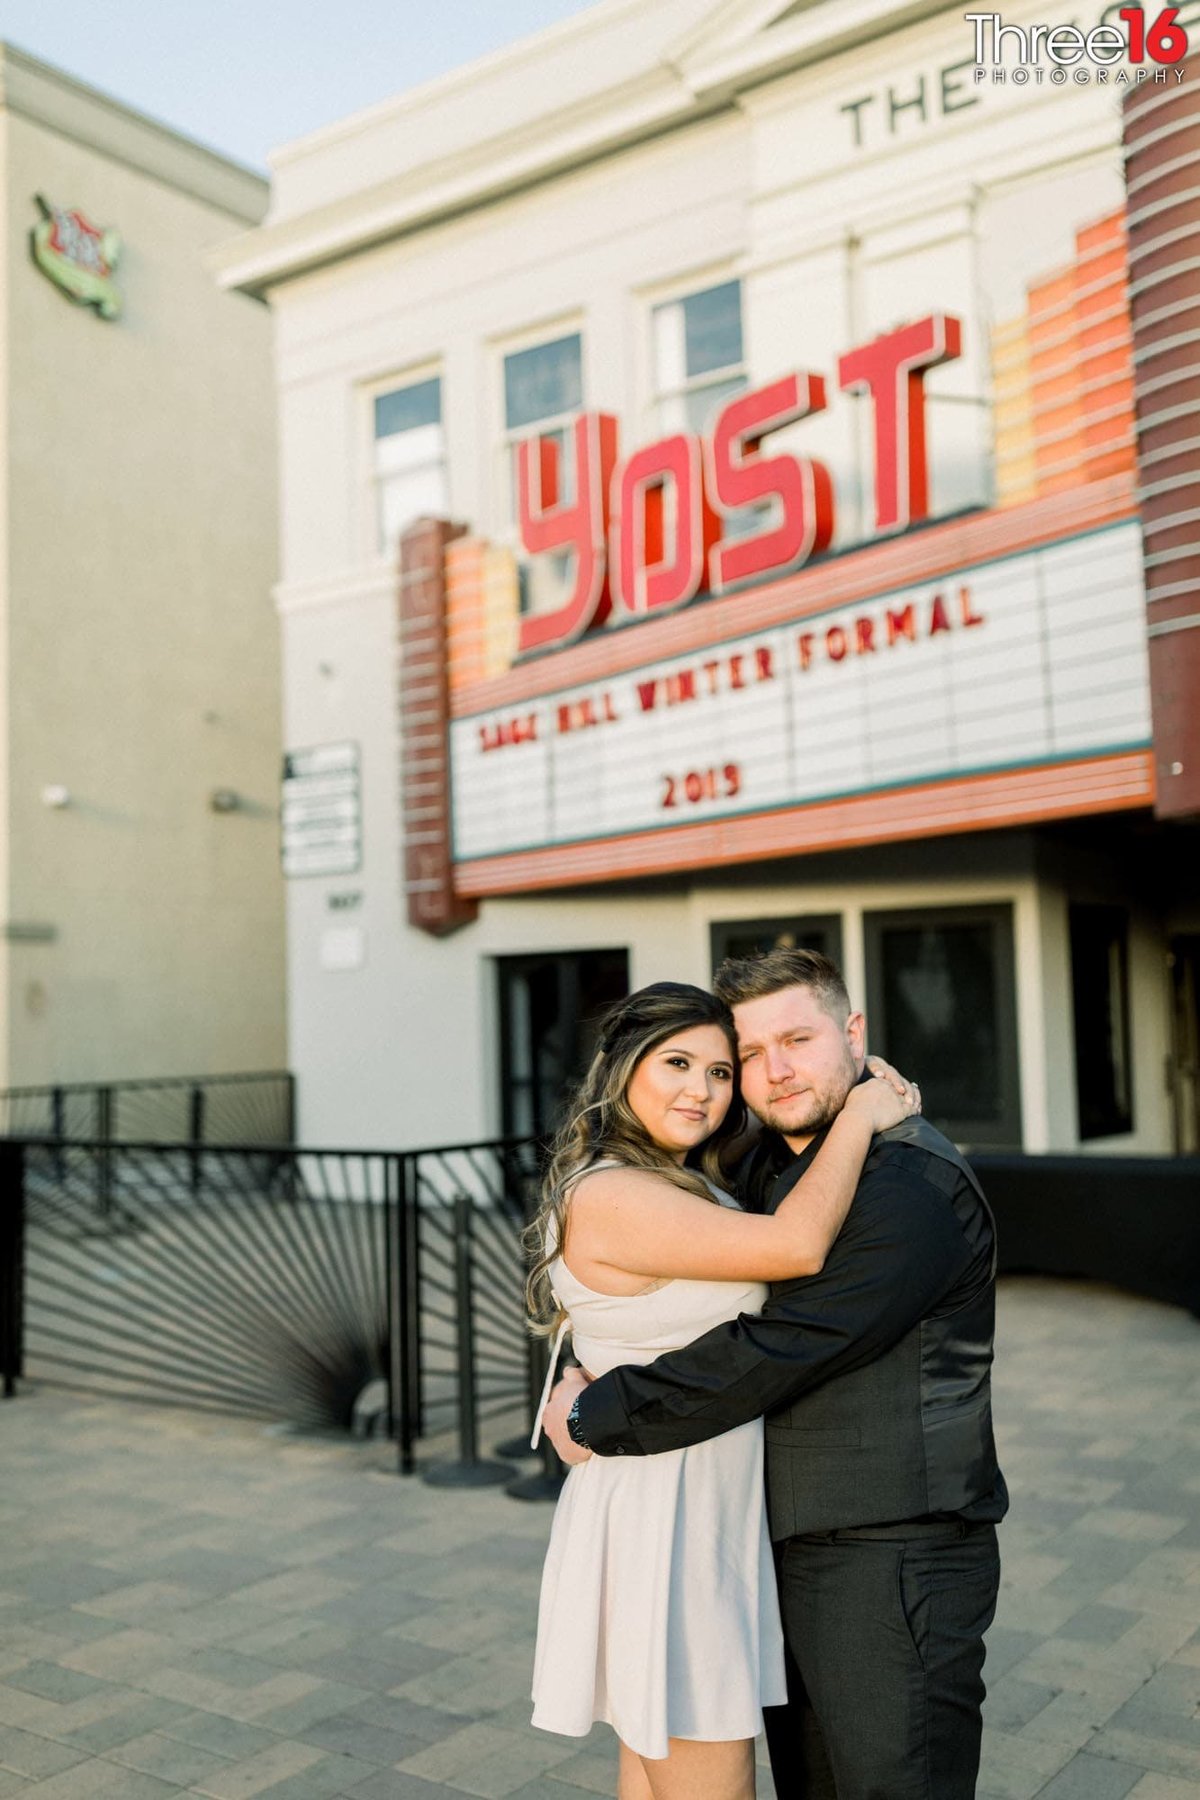 Engaged couple embrace in front of the Yost Theater in Santa Ana